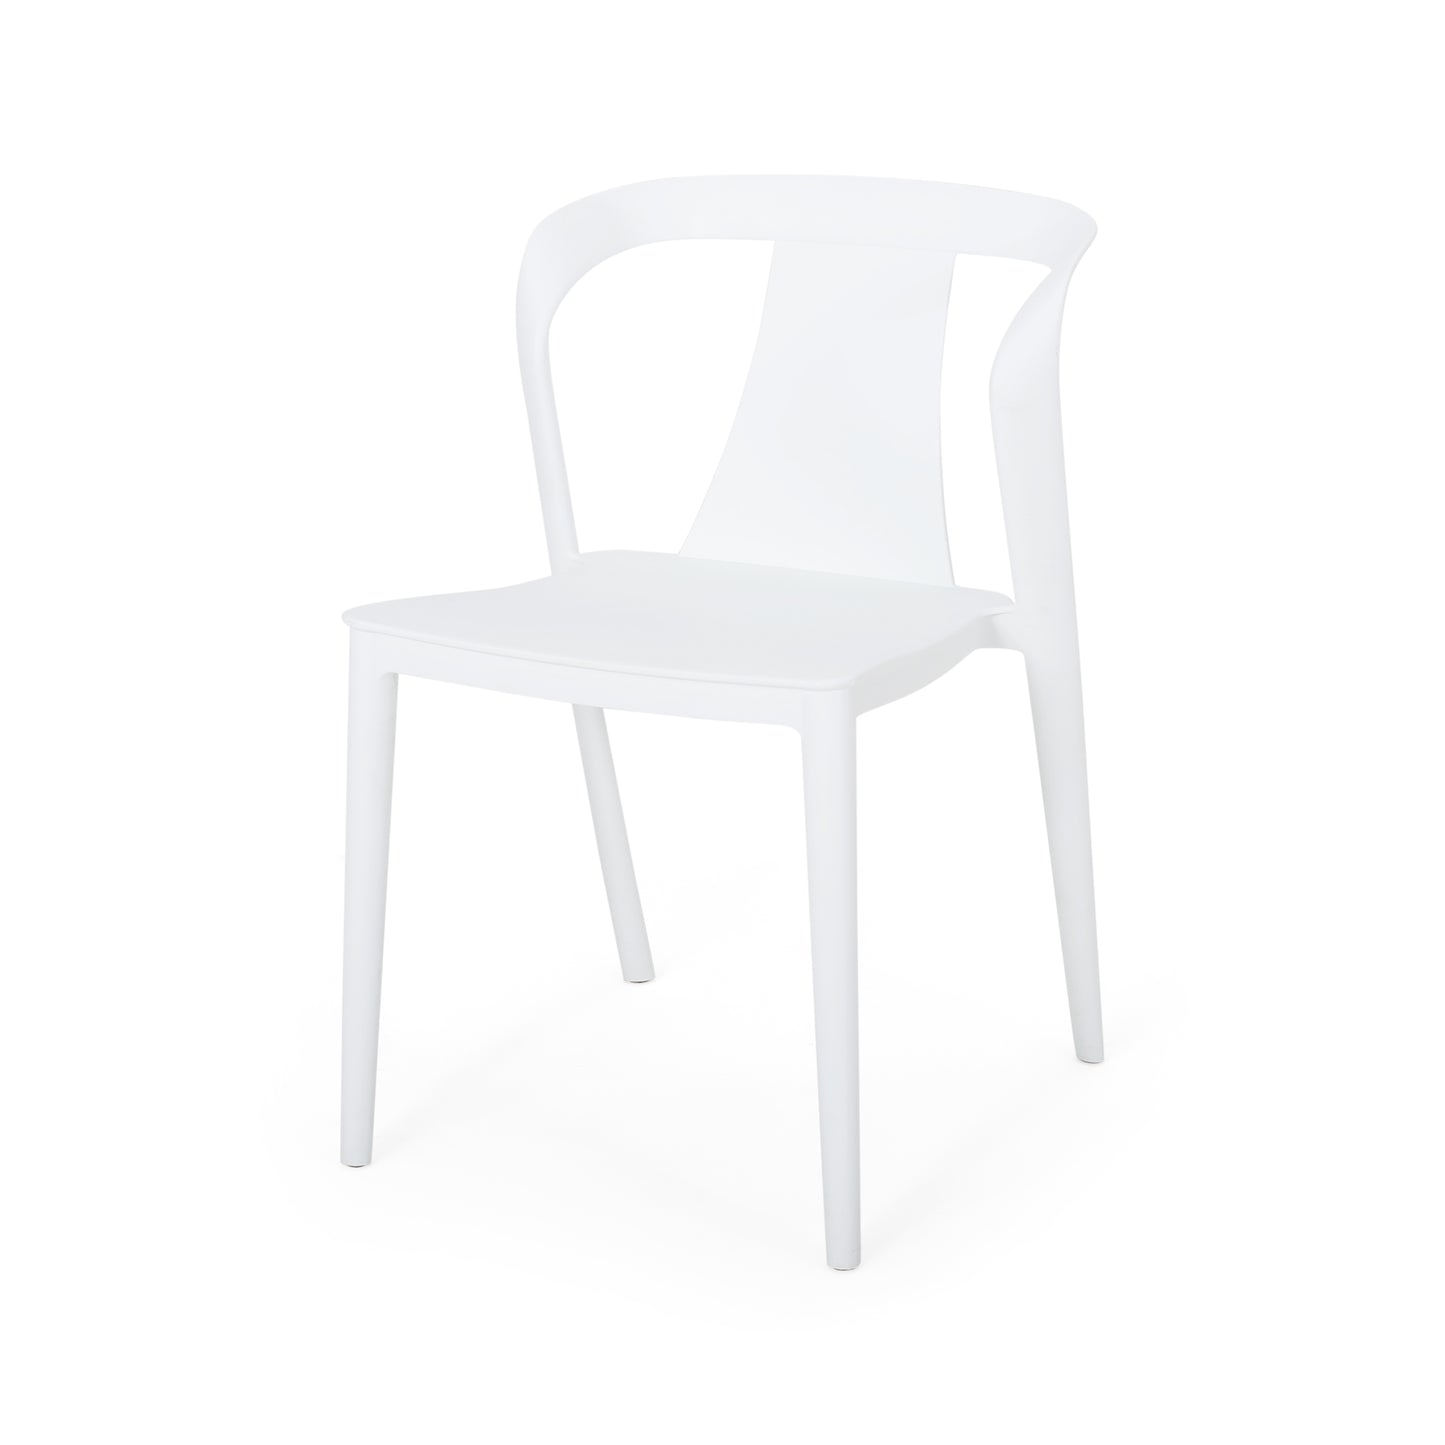 Janely Outdoor Stacking Dining Chair (Set of 2)